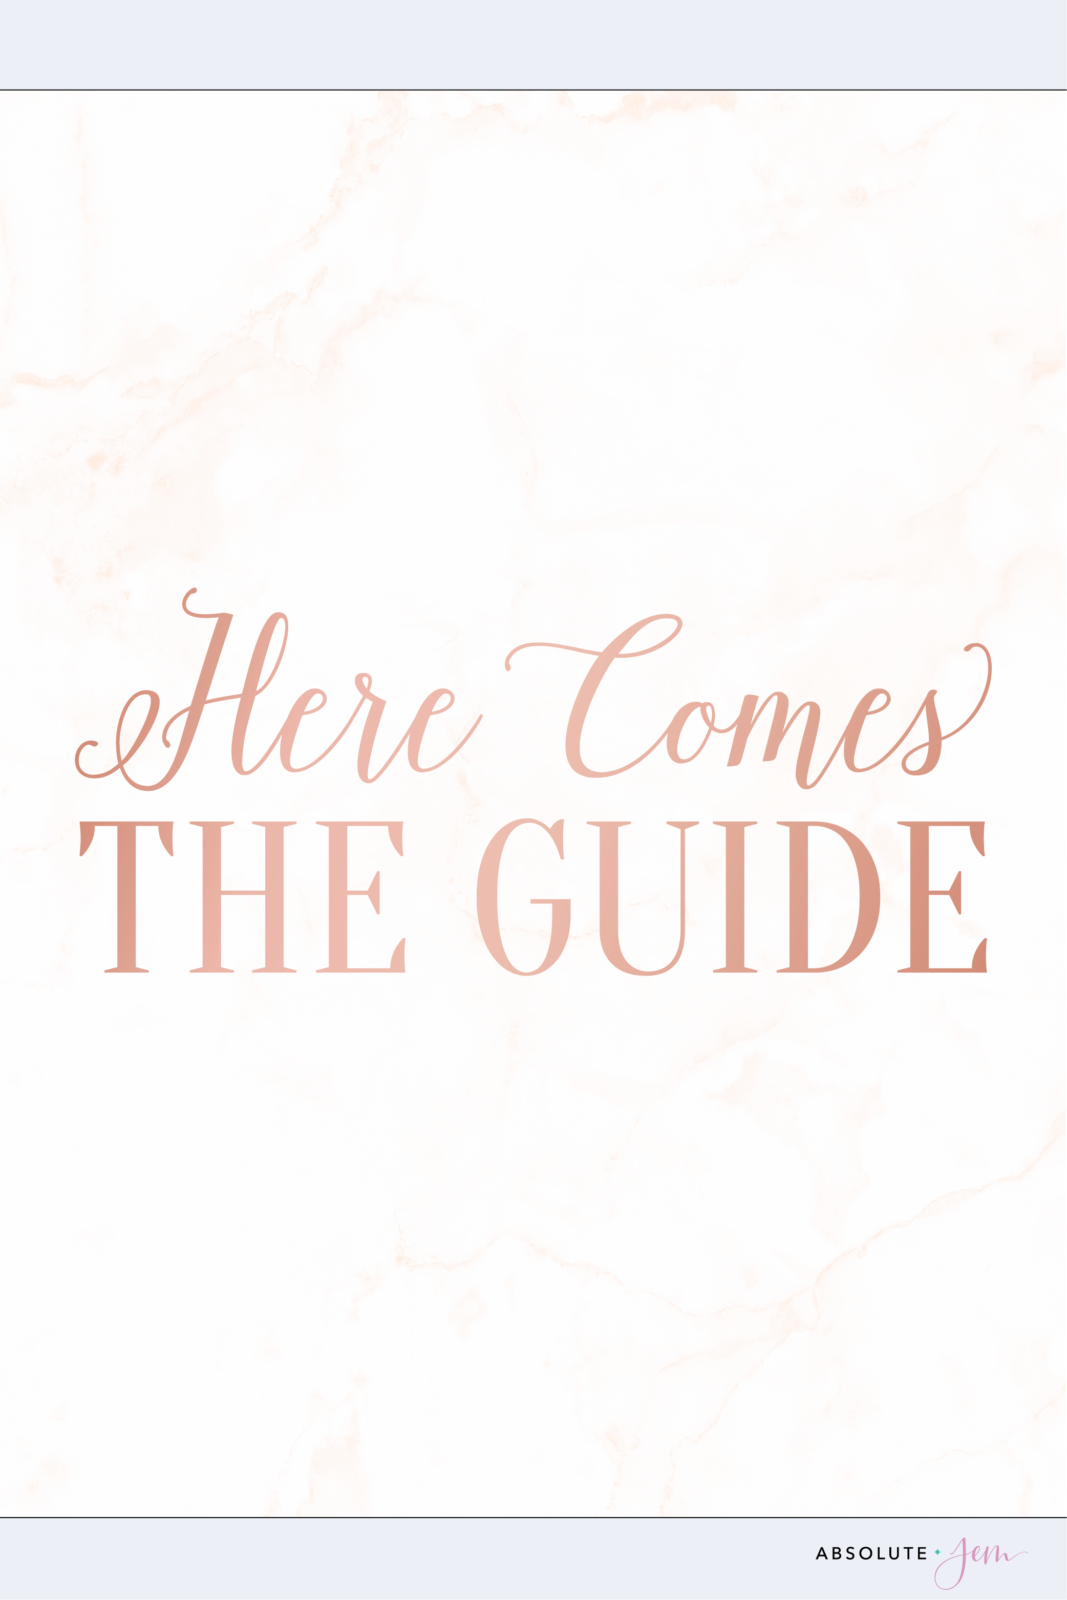 Here Comes The Guide Wordmark Logo Design by Absolute JEM